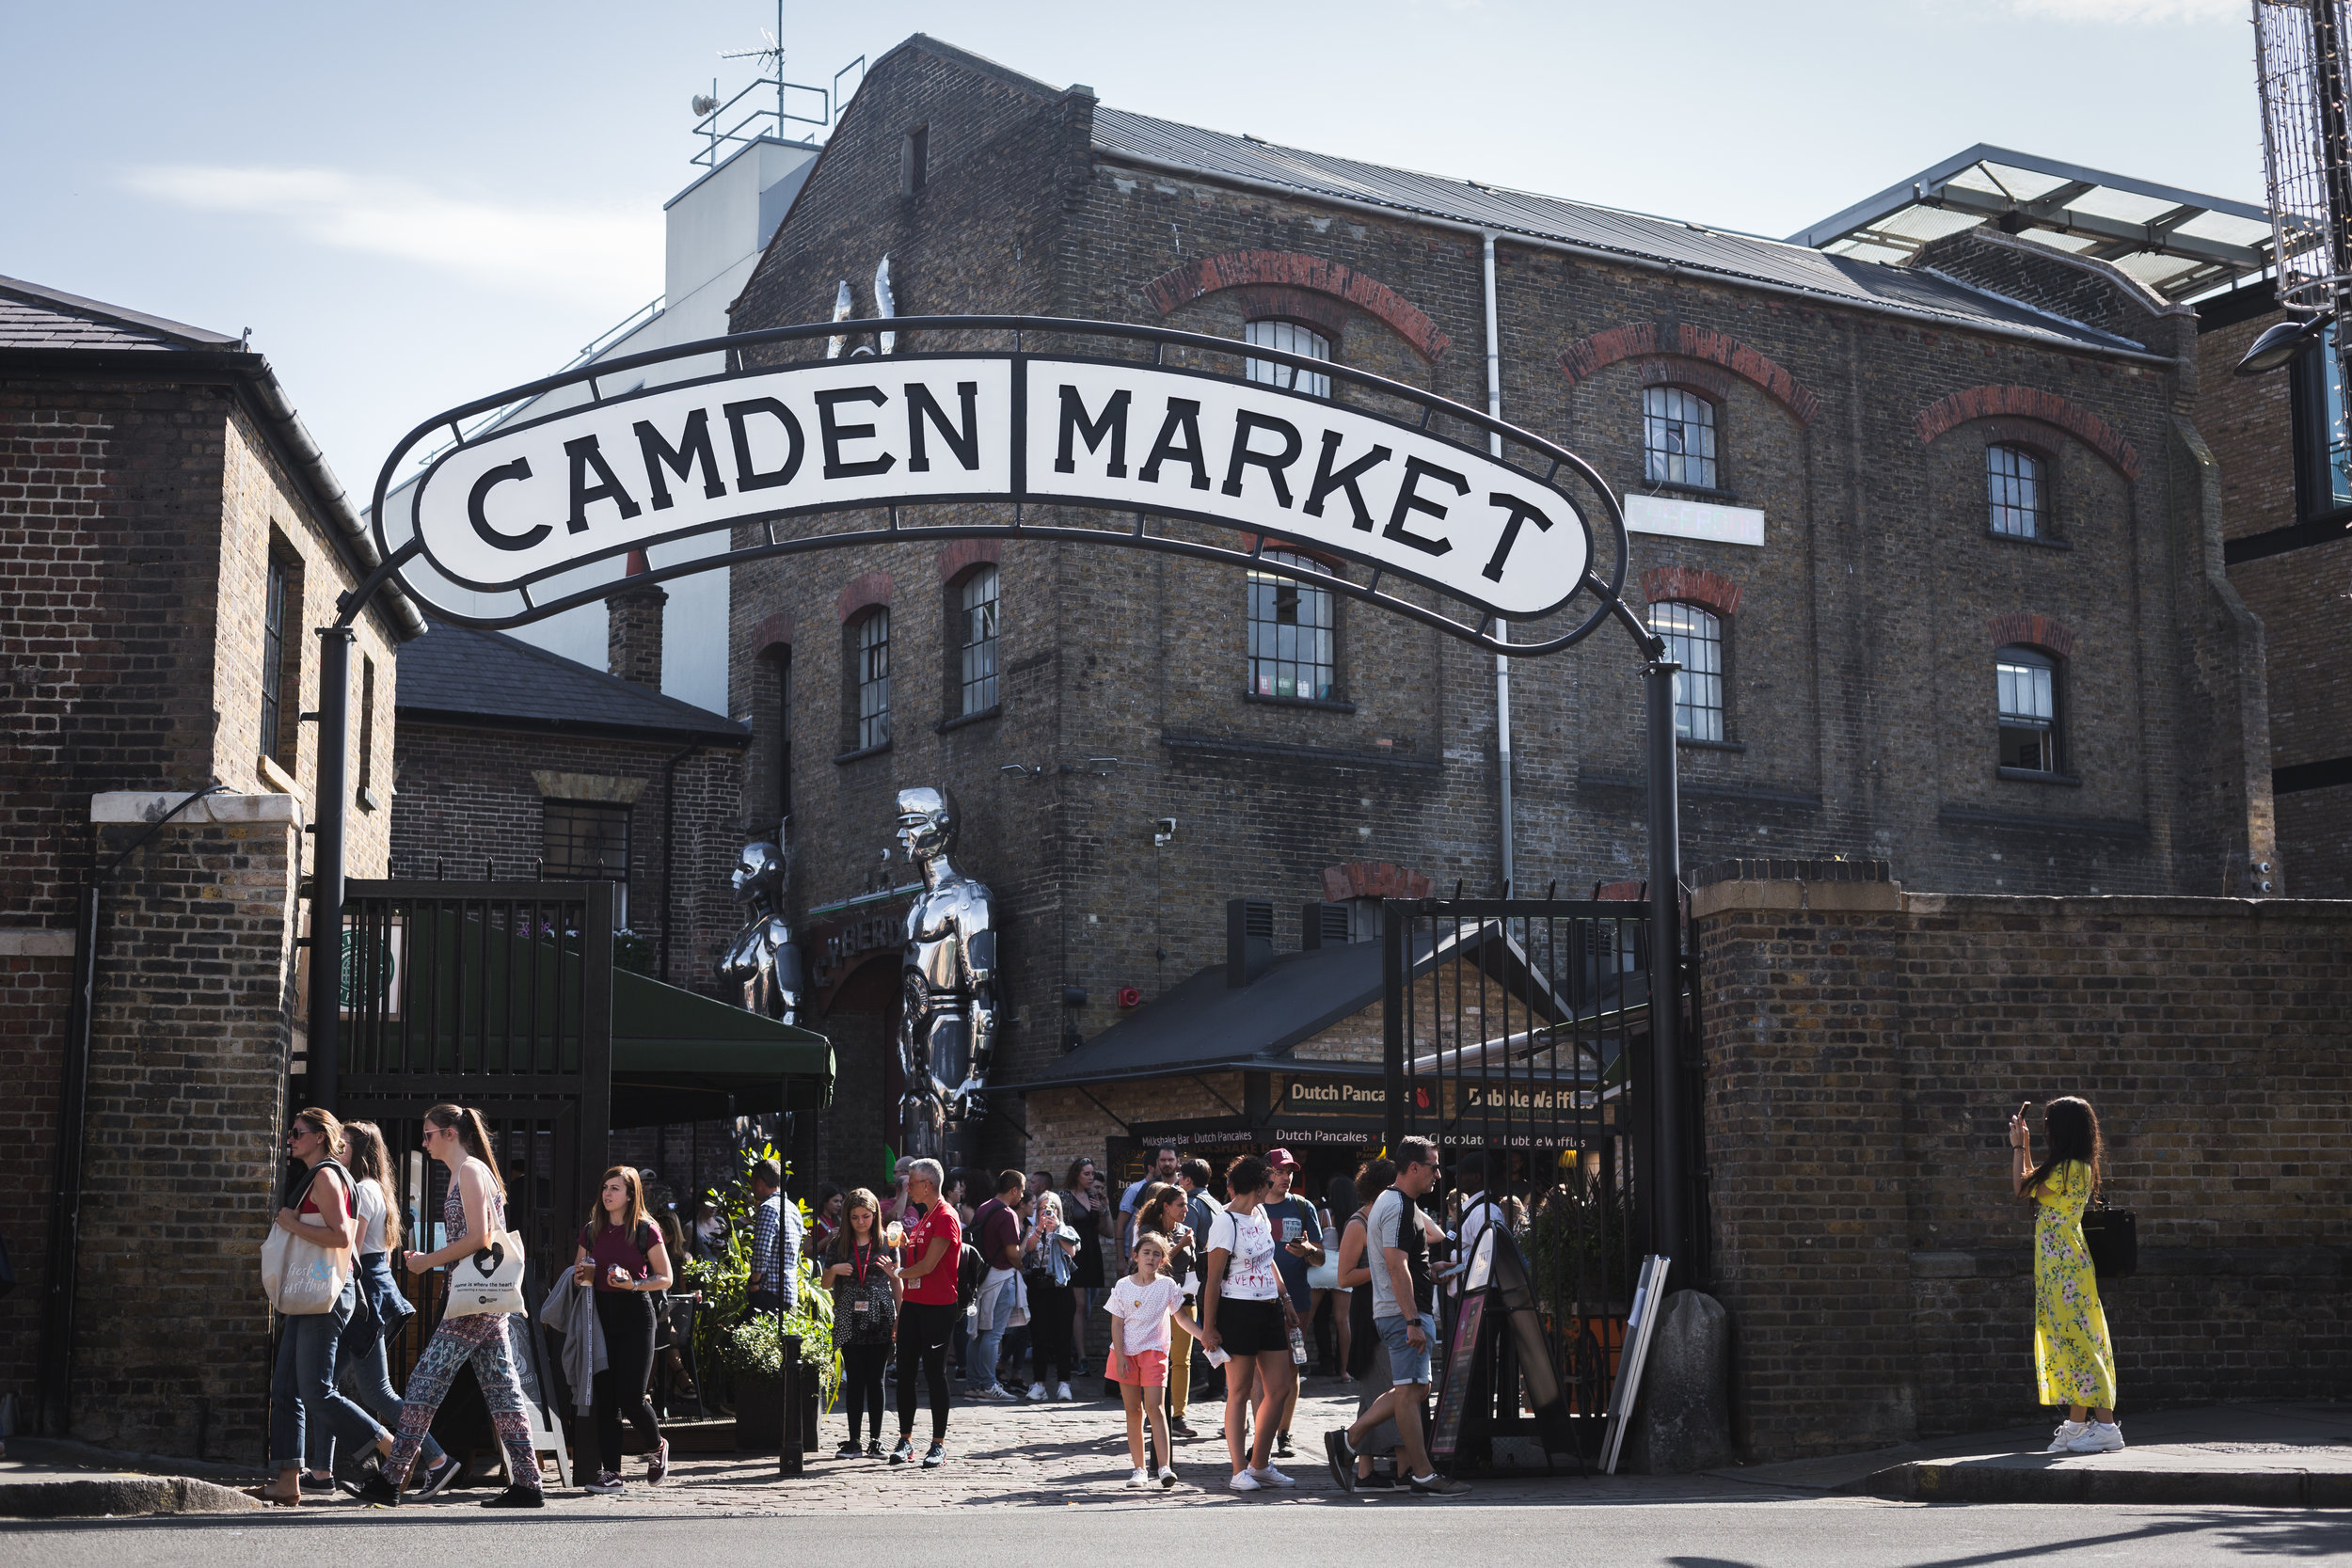 Camden market was just a short walk from Fellows' lodging this past summer and was a popular late-night food option, July 2019. (Copy)